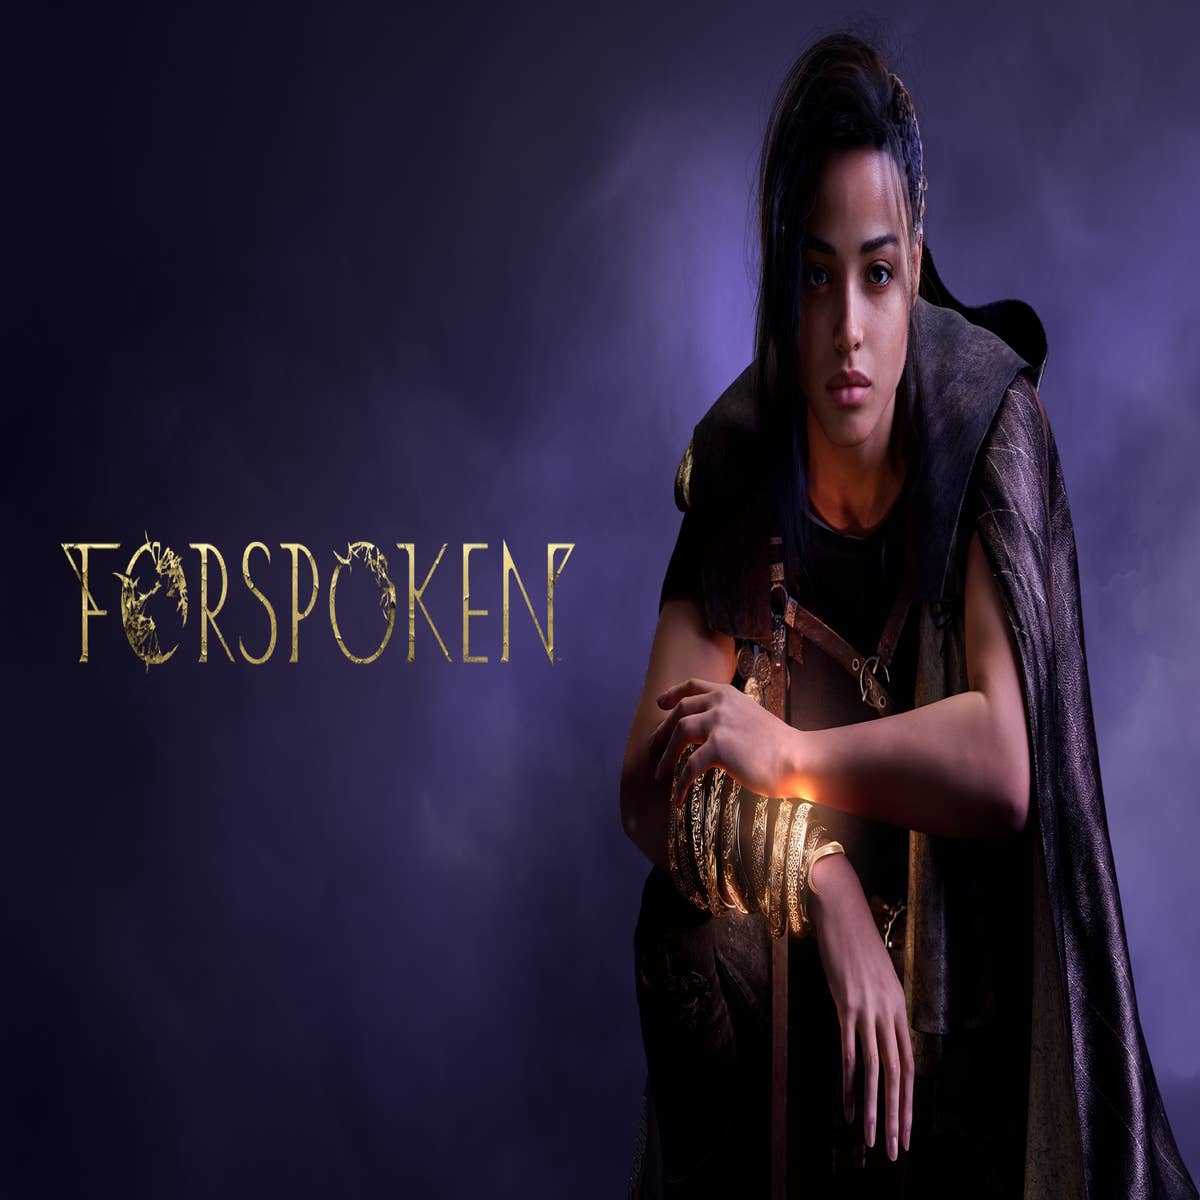 Forspoken comes to PS5 in 2022 – PlayStation.Blog